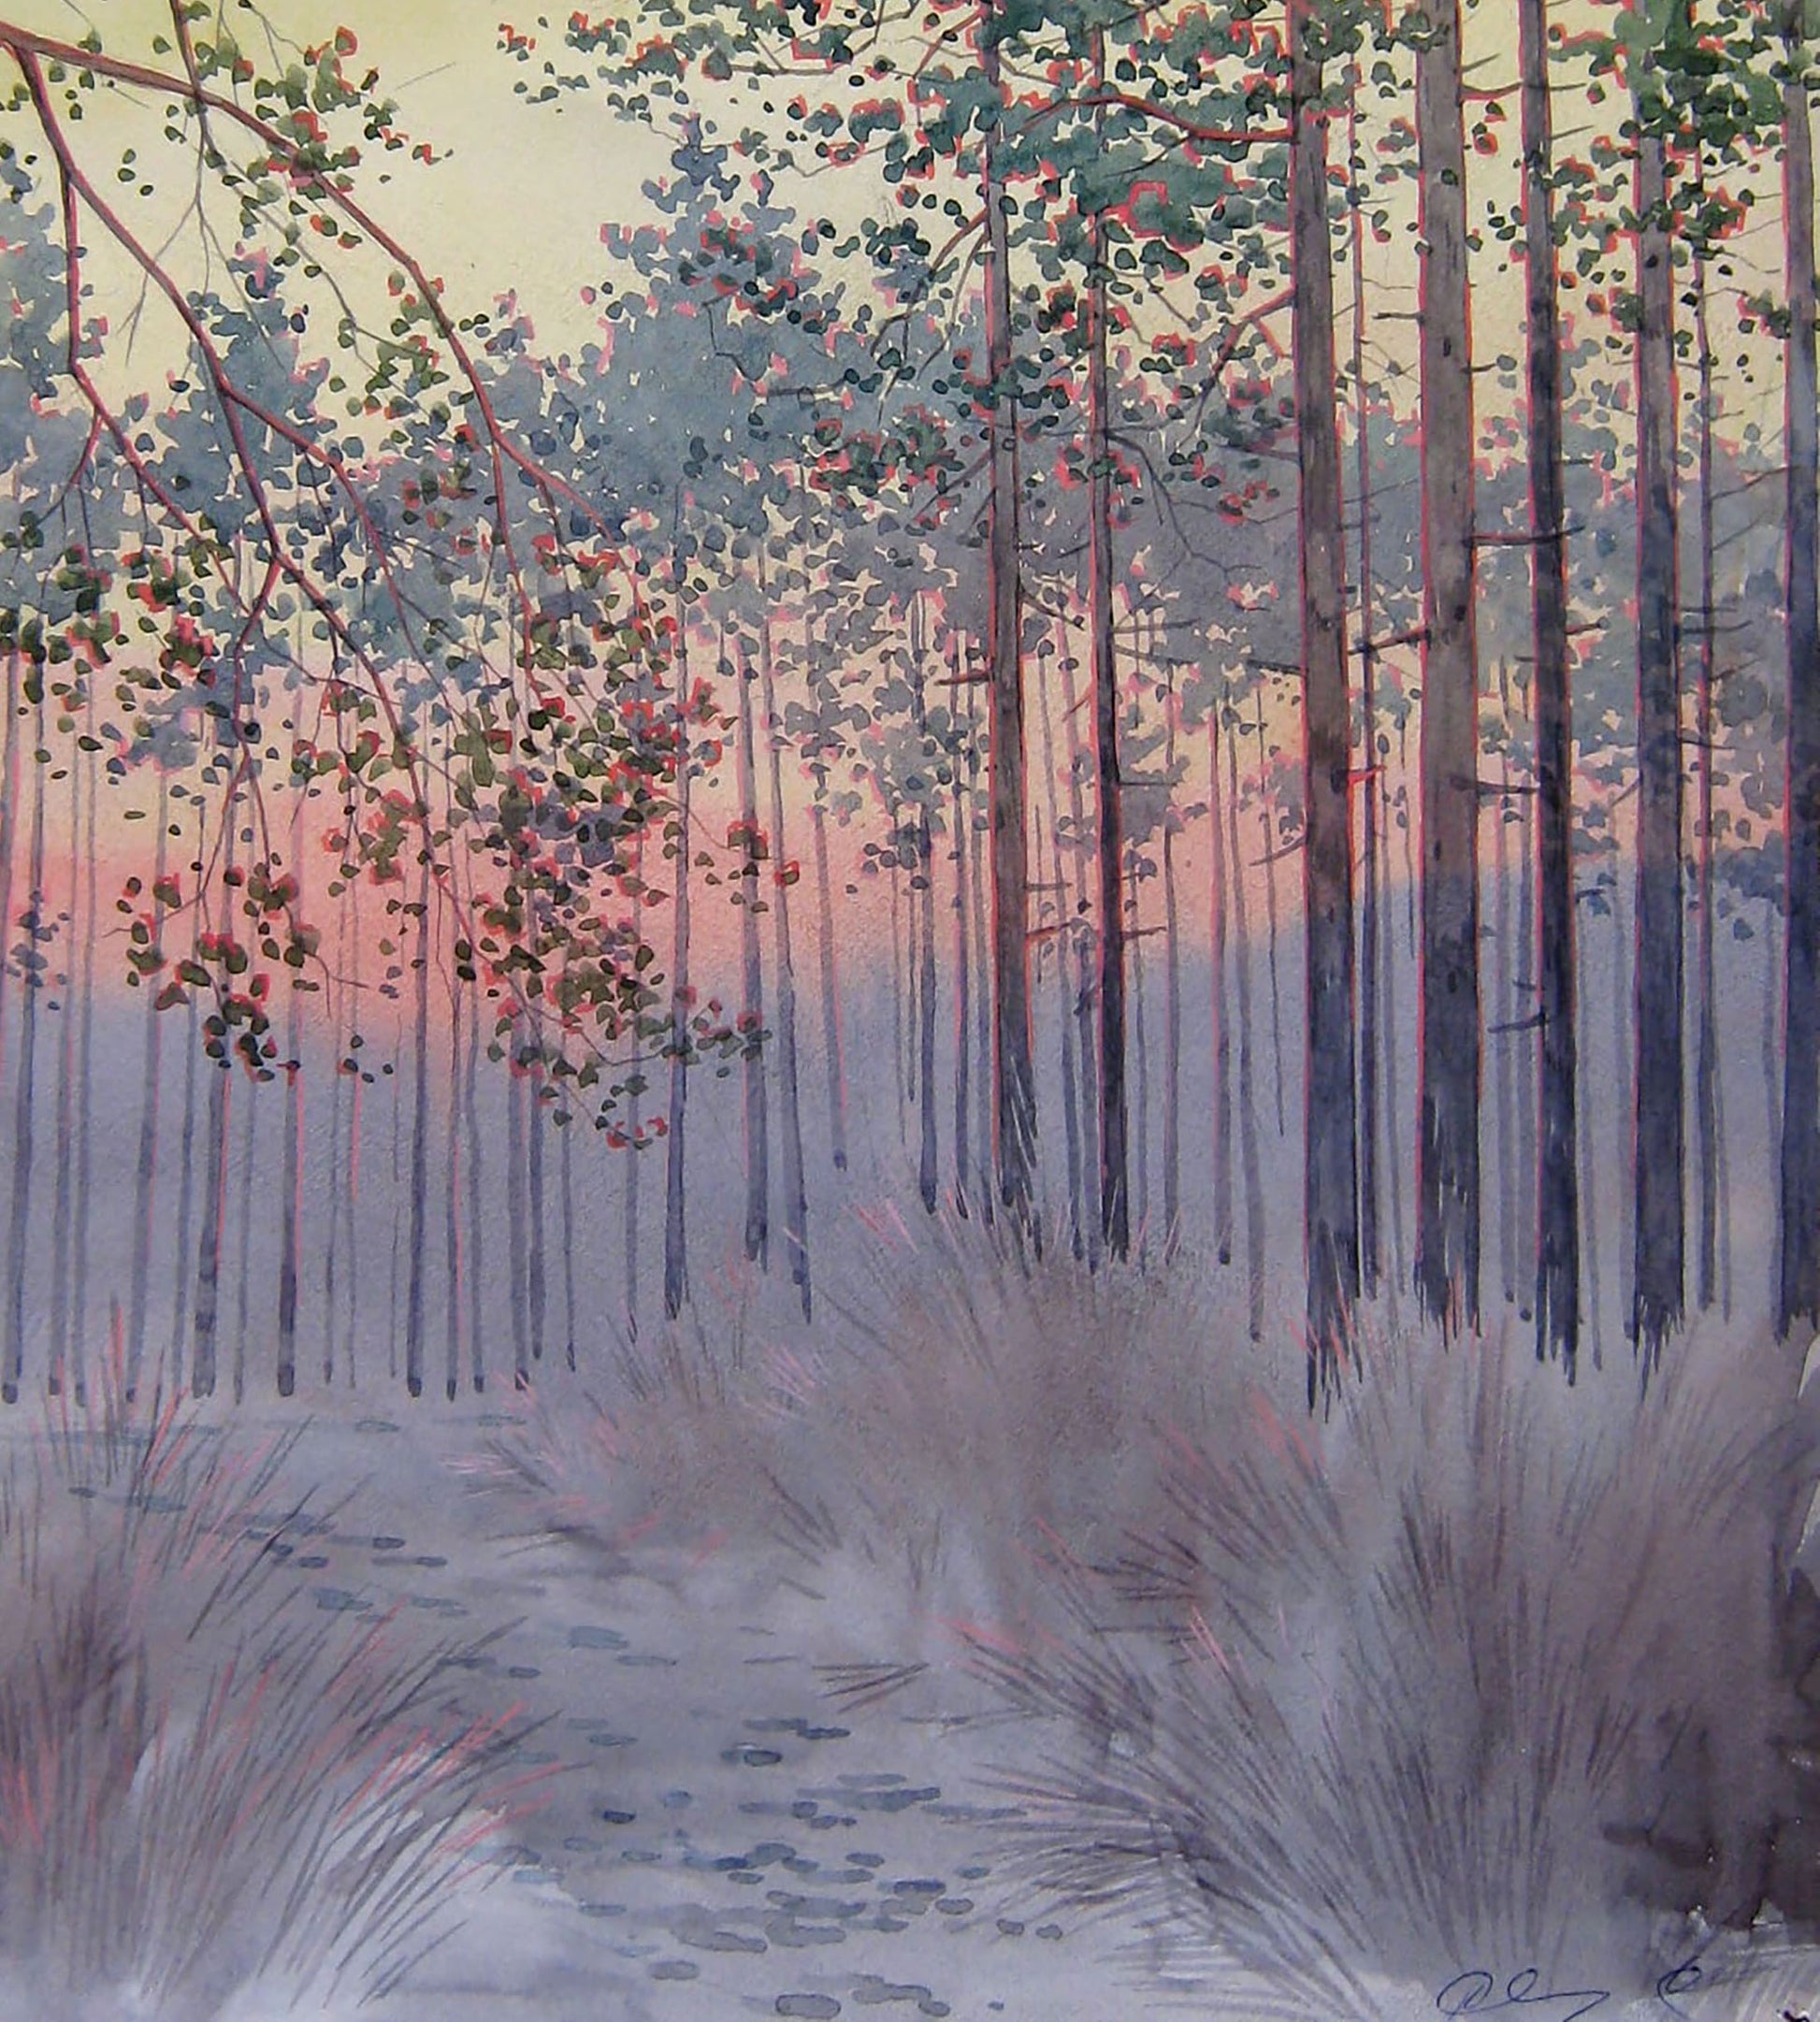 The watercolor piece "February Sunset in the Forest" by Valery Savenets